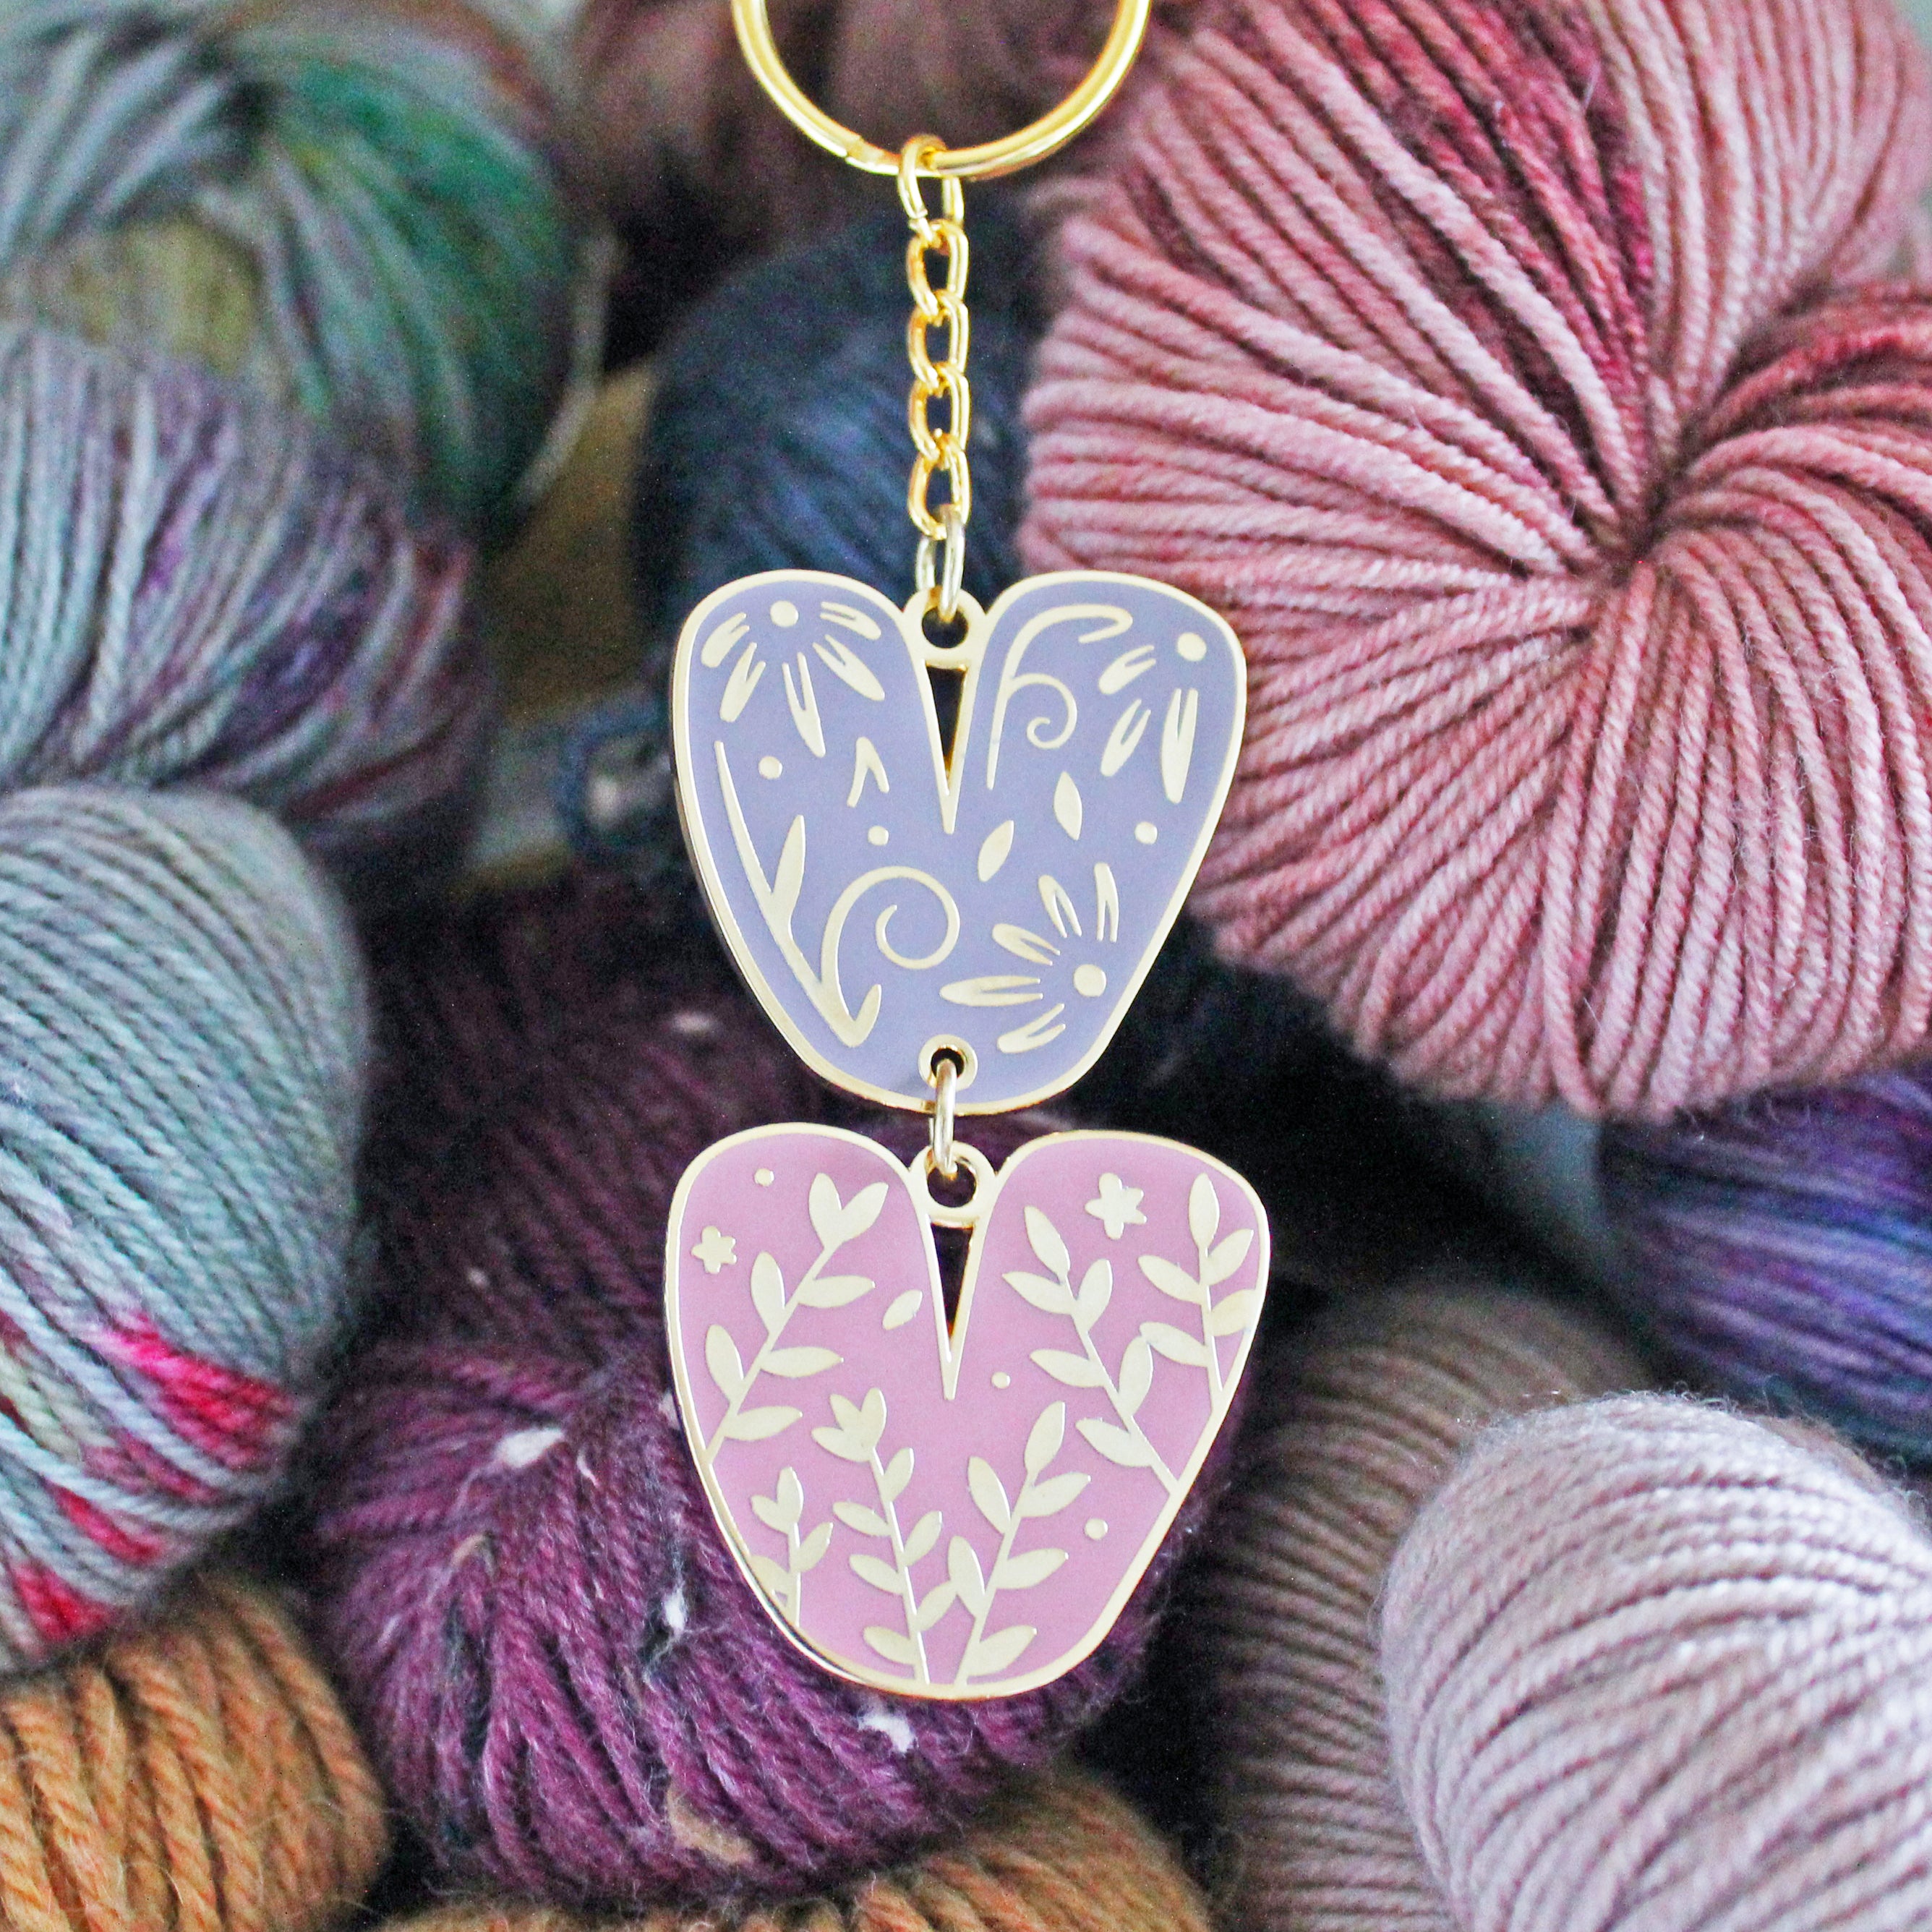 Keychain of floral chunky knit stitches. Fun knitting enamel keychain for fiber enthusiasts.